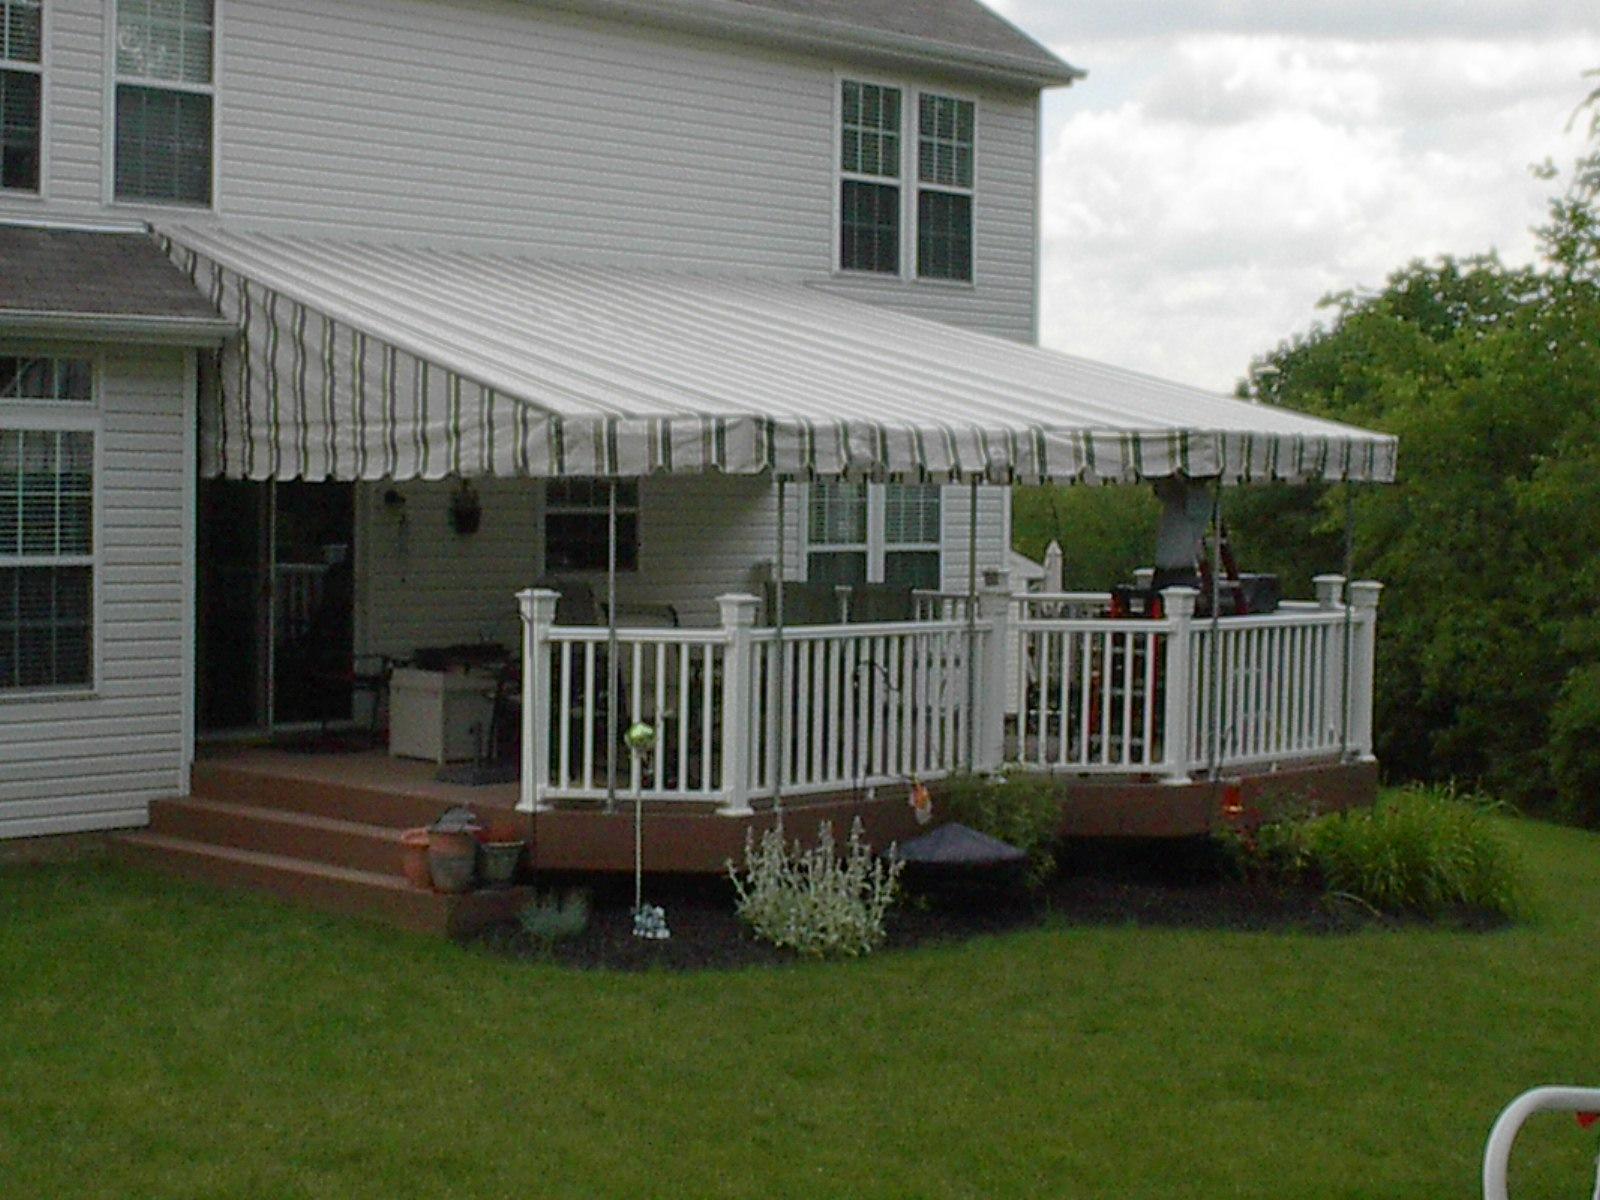 Canvas Awnings for Your Home